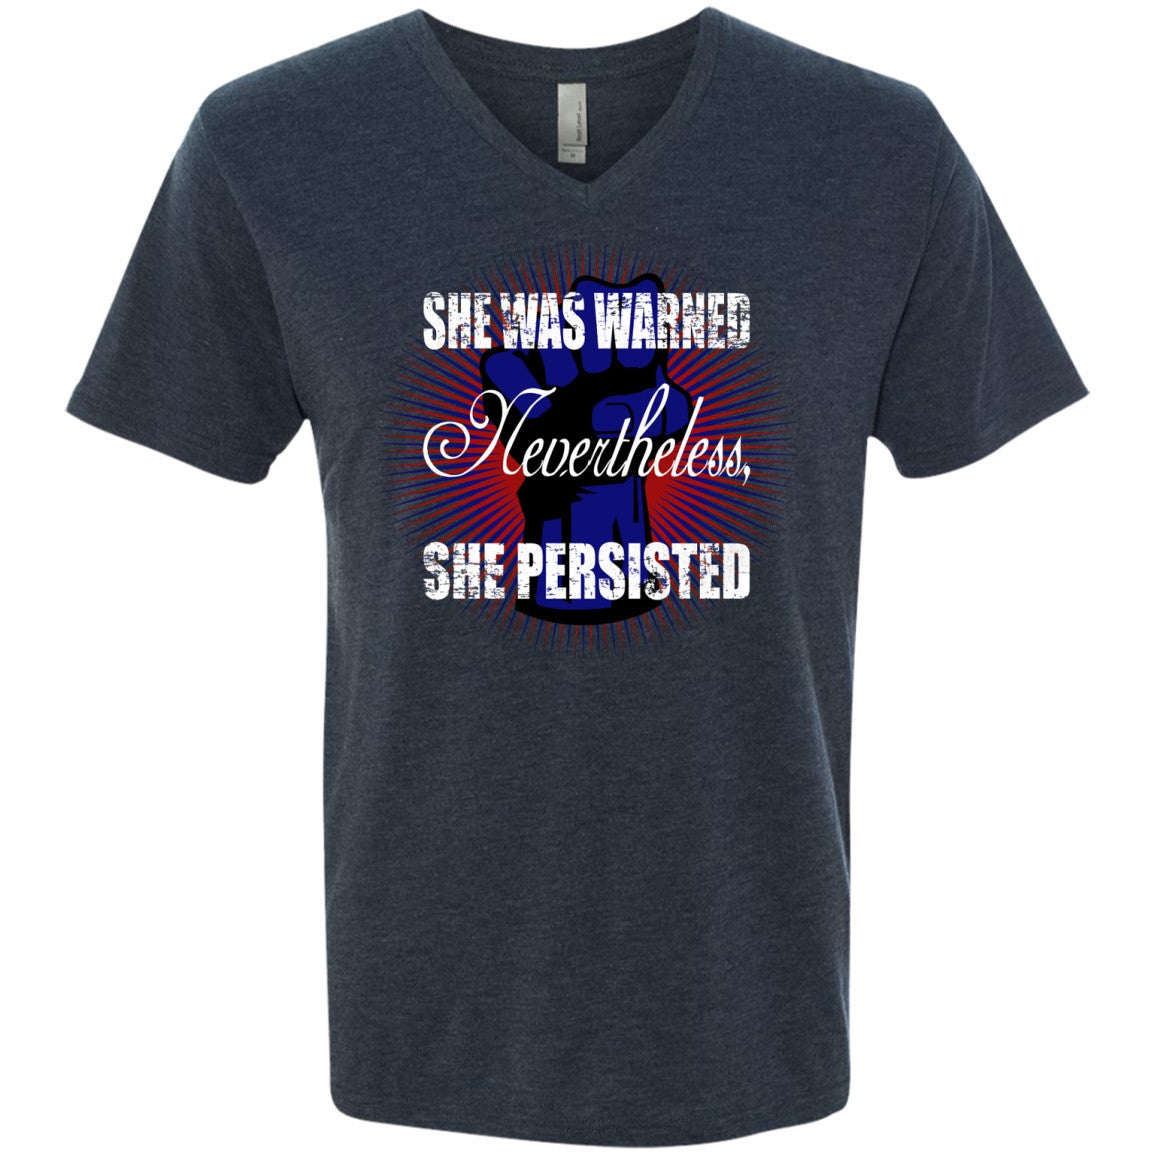 Nevertheless She Persisted - Men's T-Shirts - GoneBold.gift